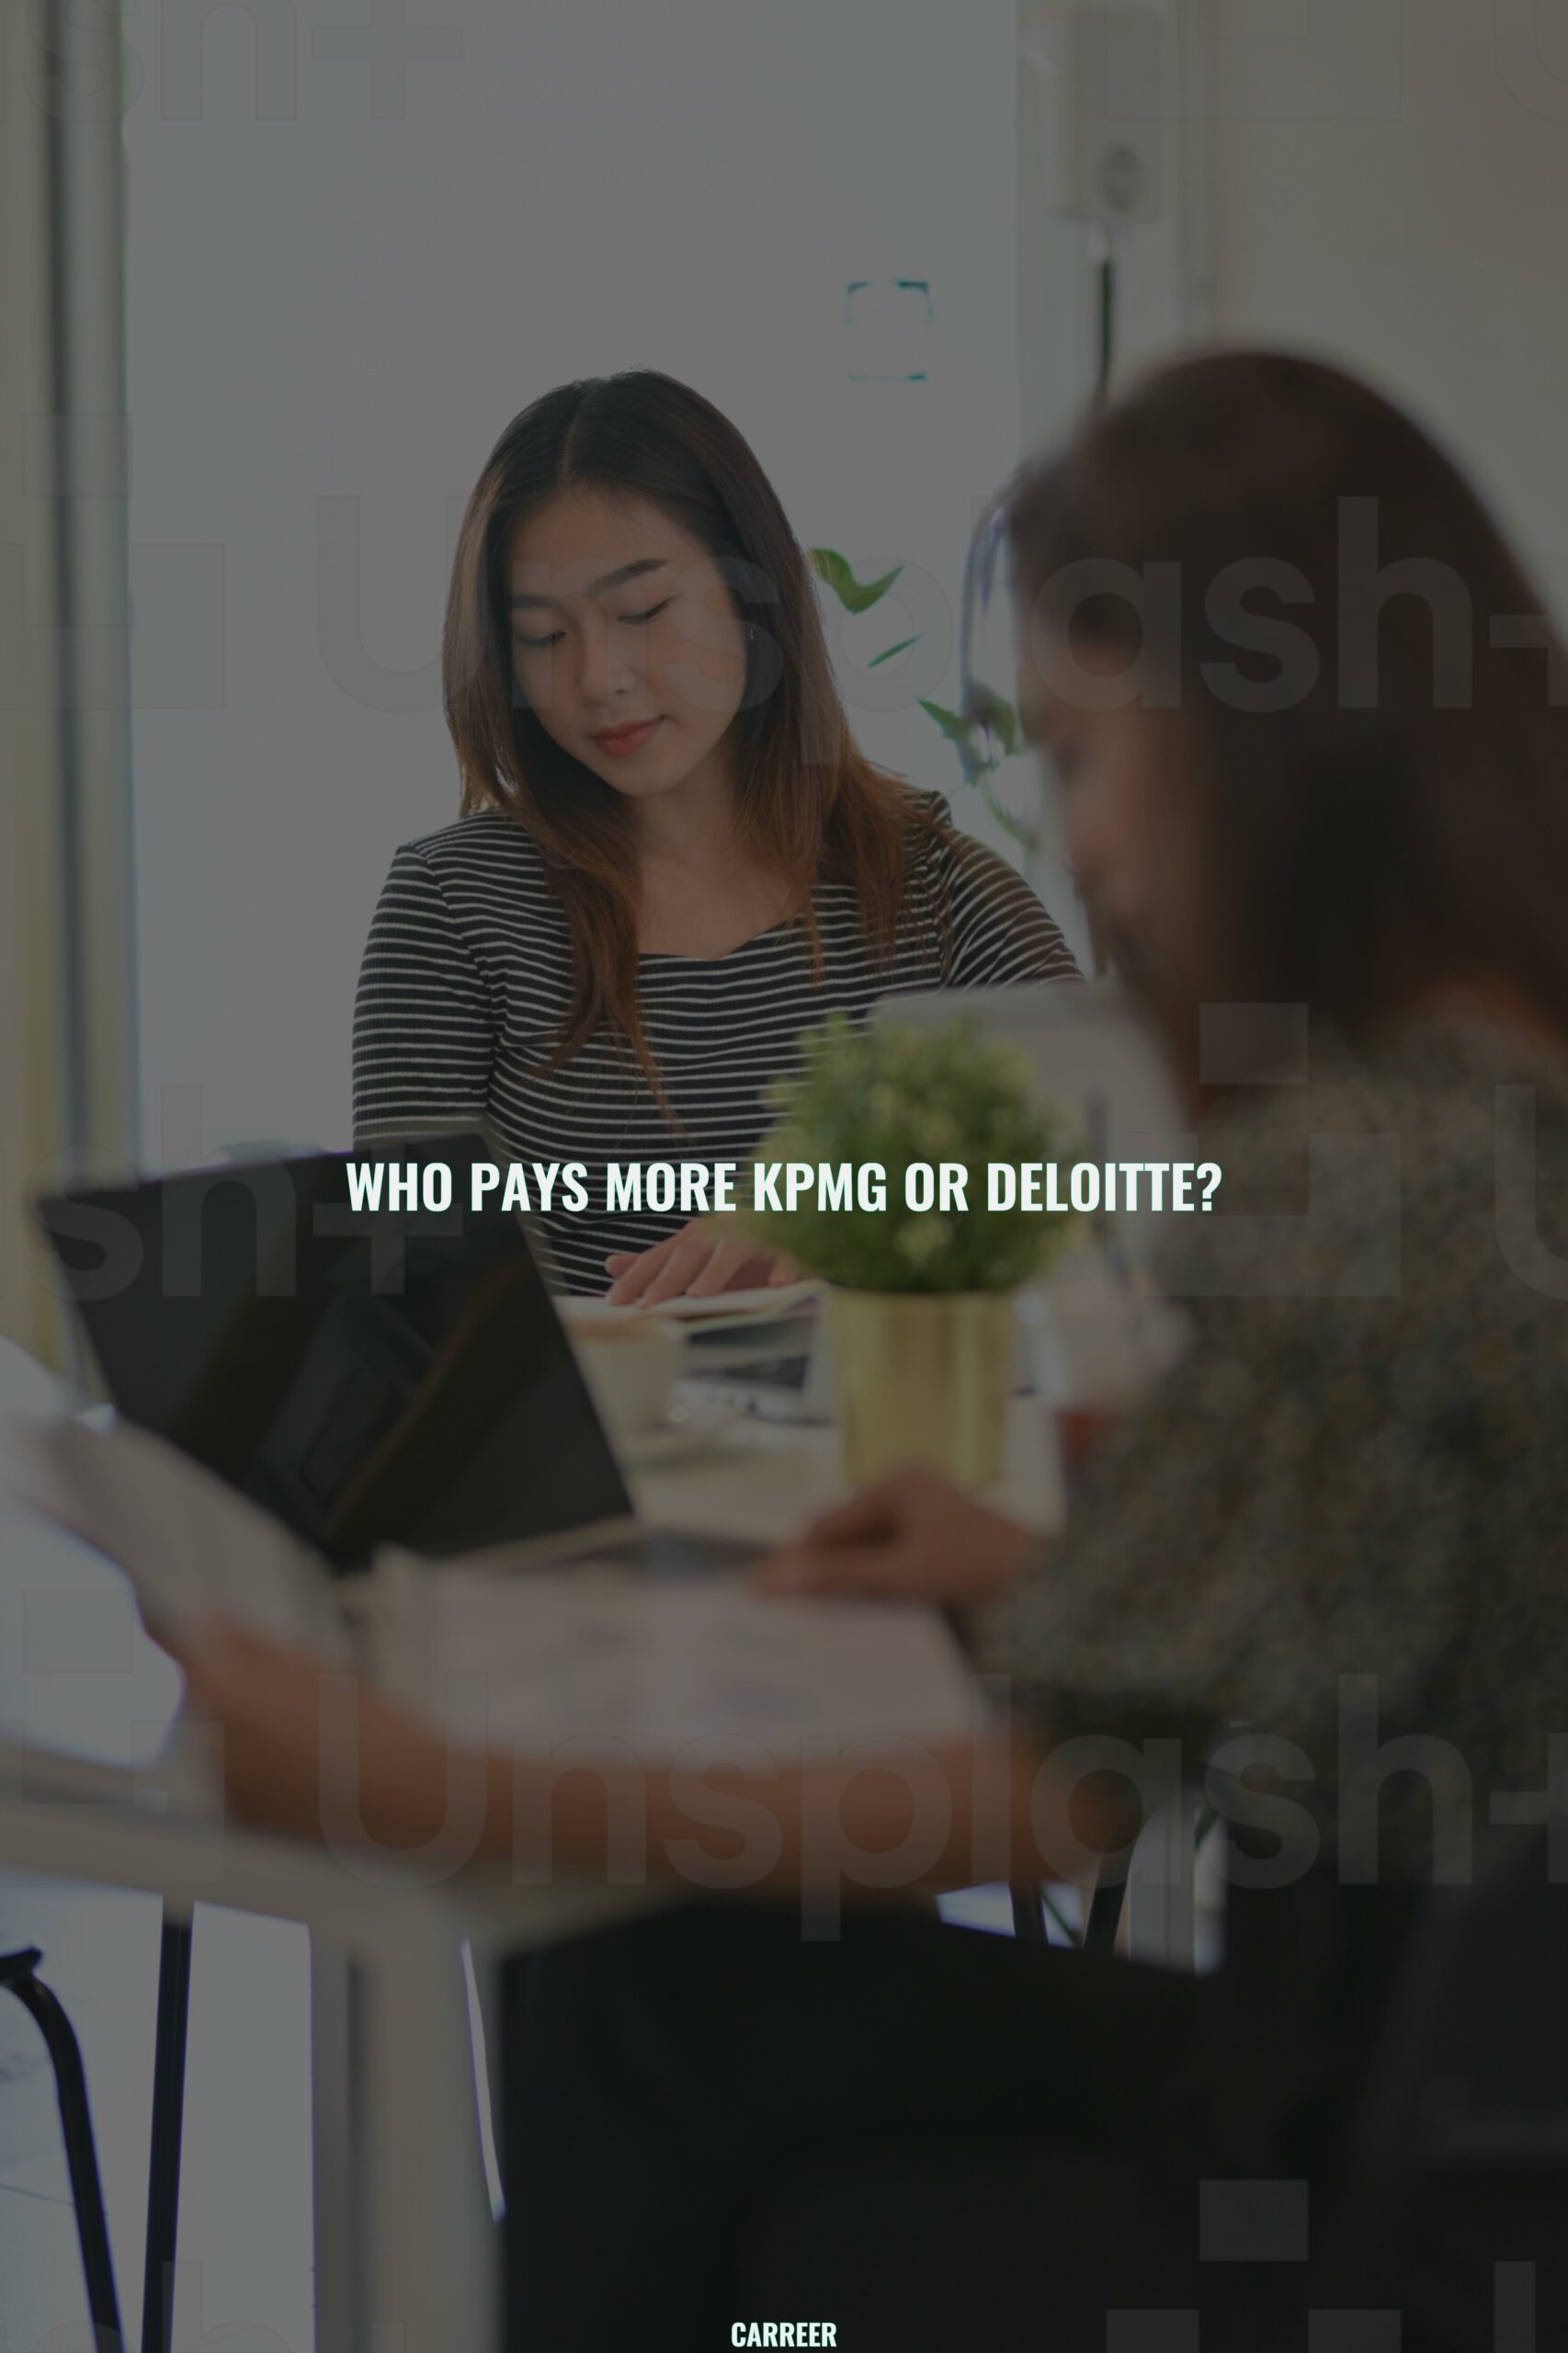 Who pays more kpmg or deloitte?